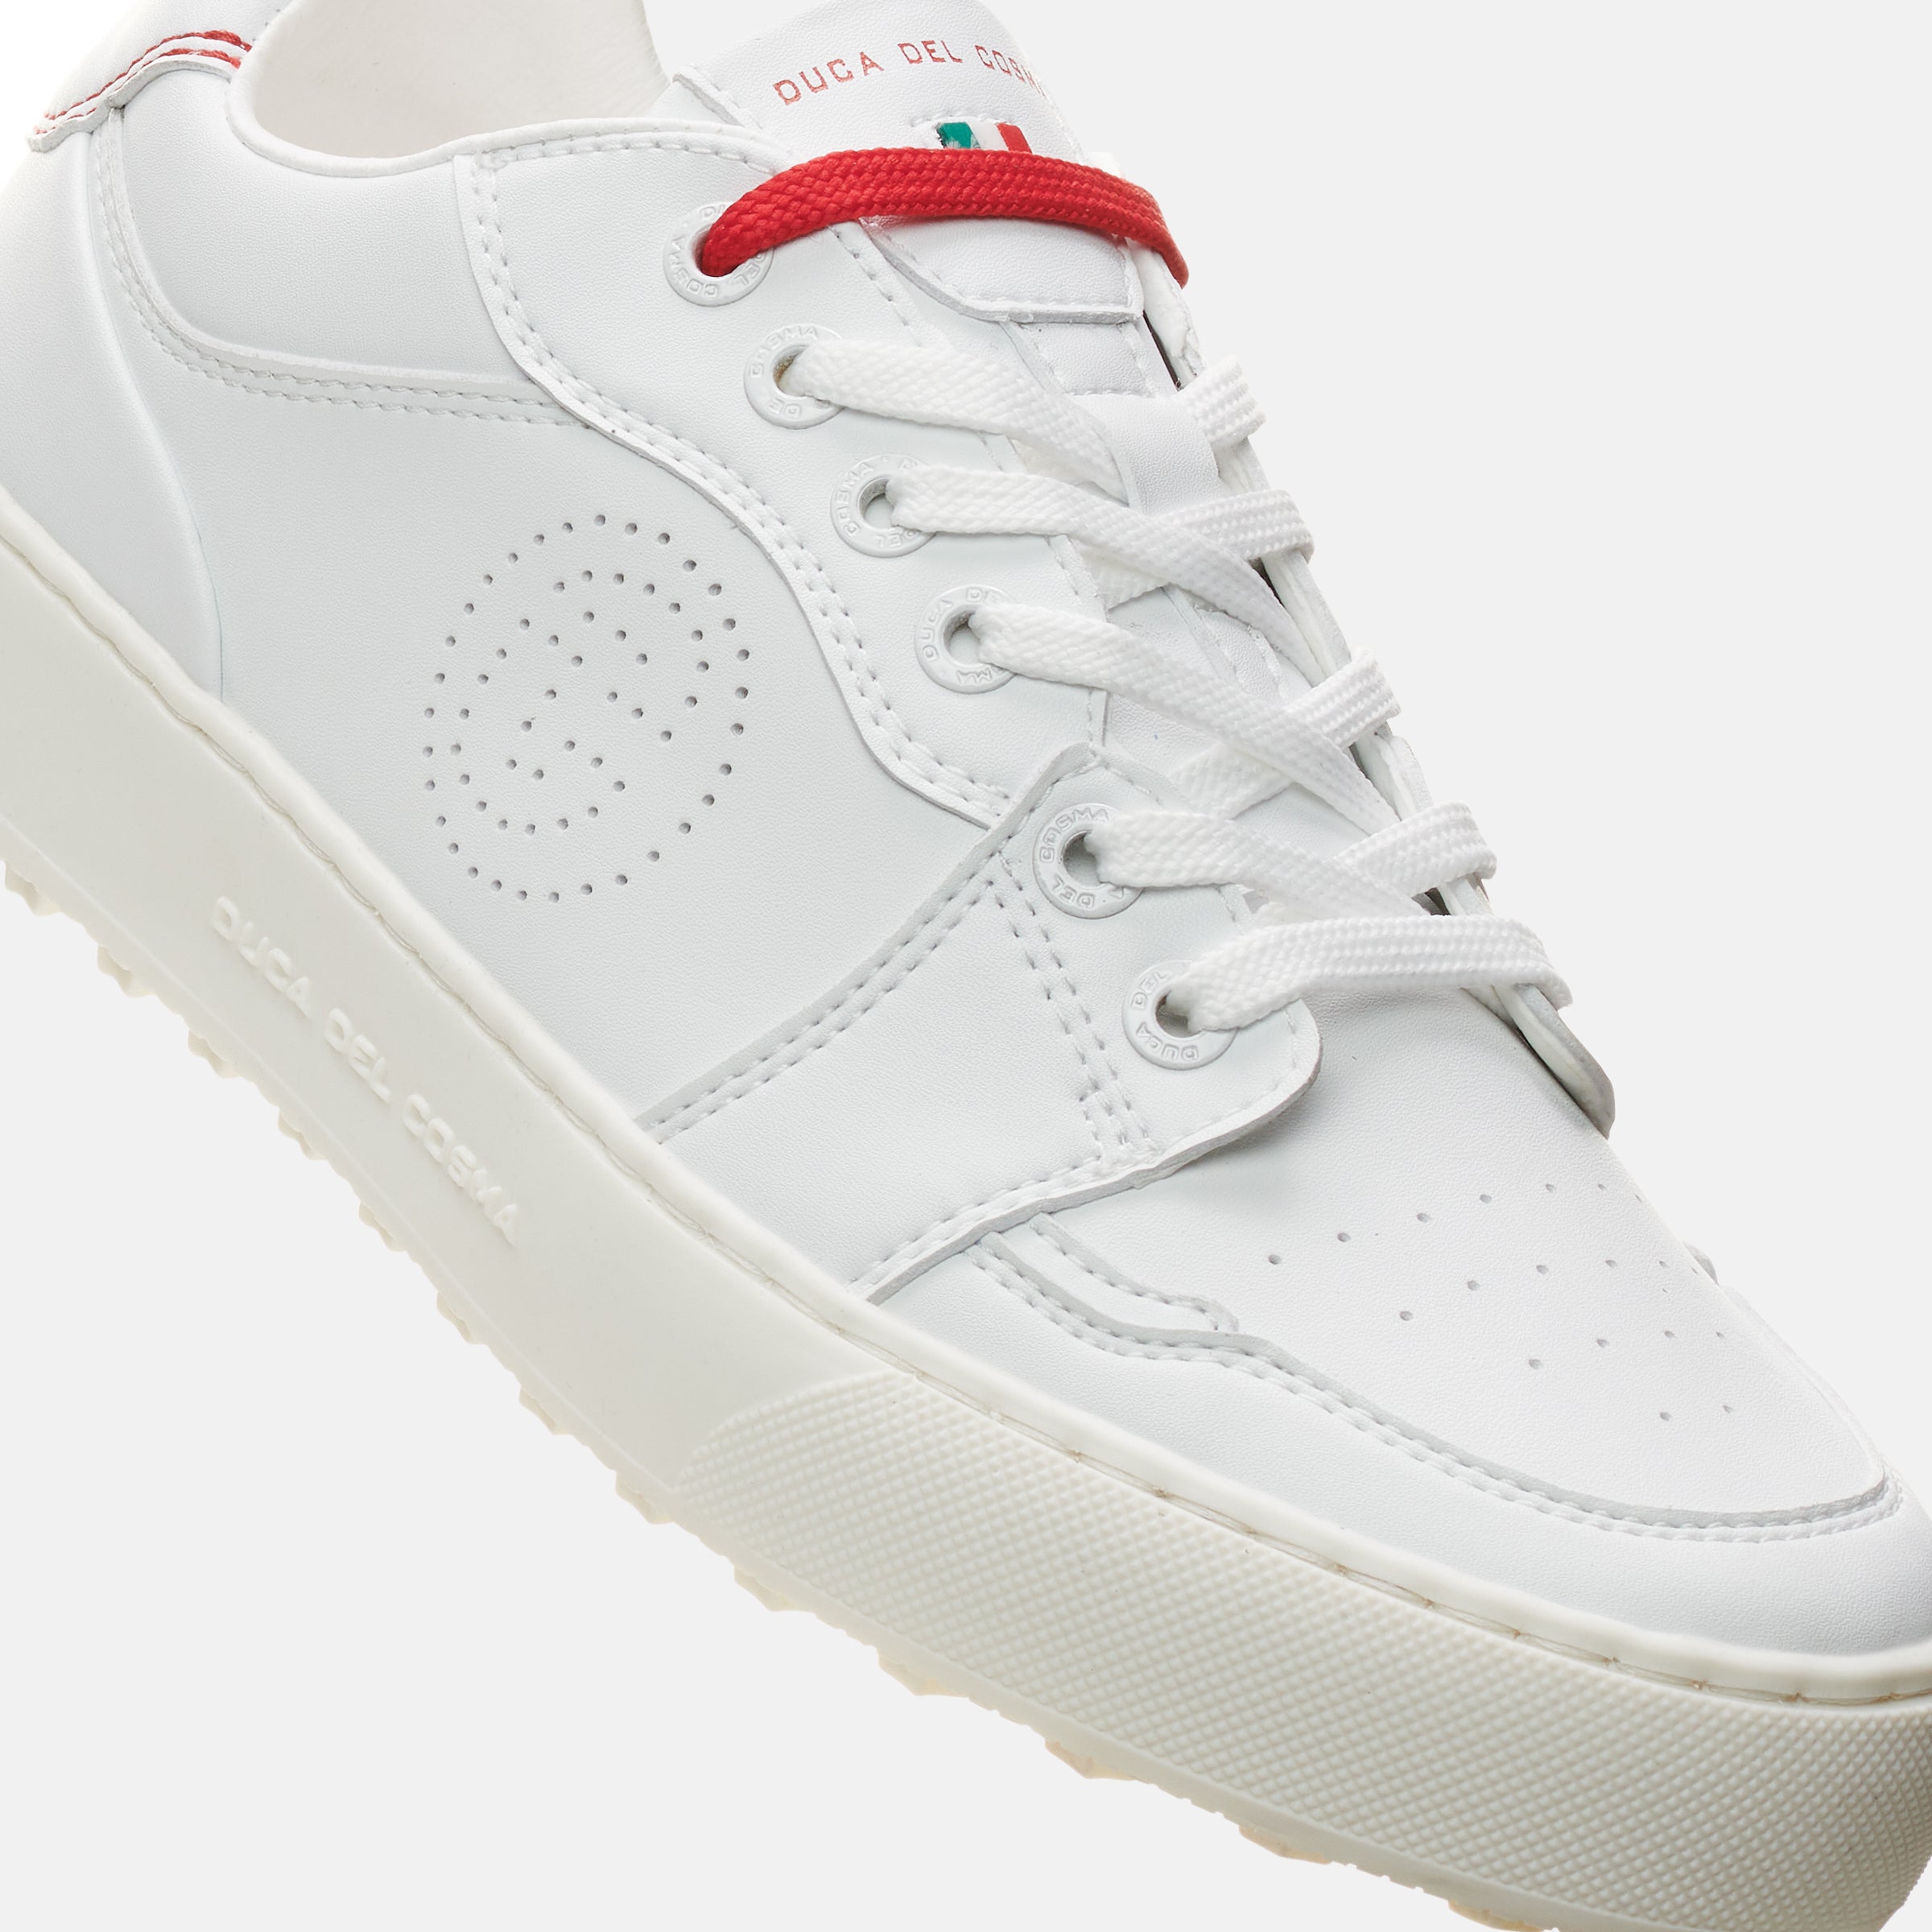 How to Clean White Sneakers | Reviews by Wirecutter